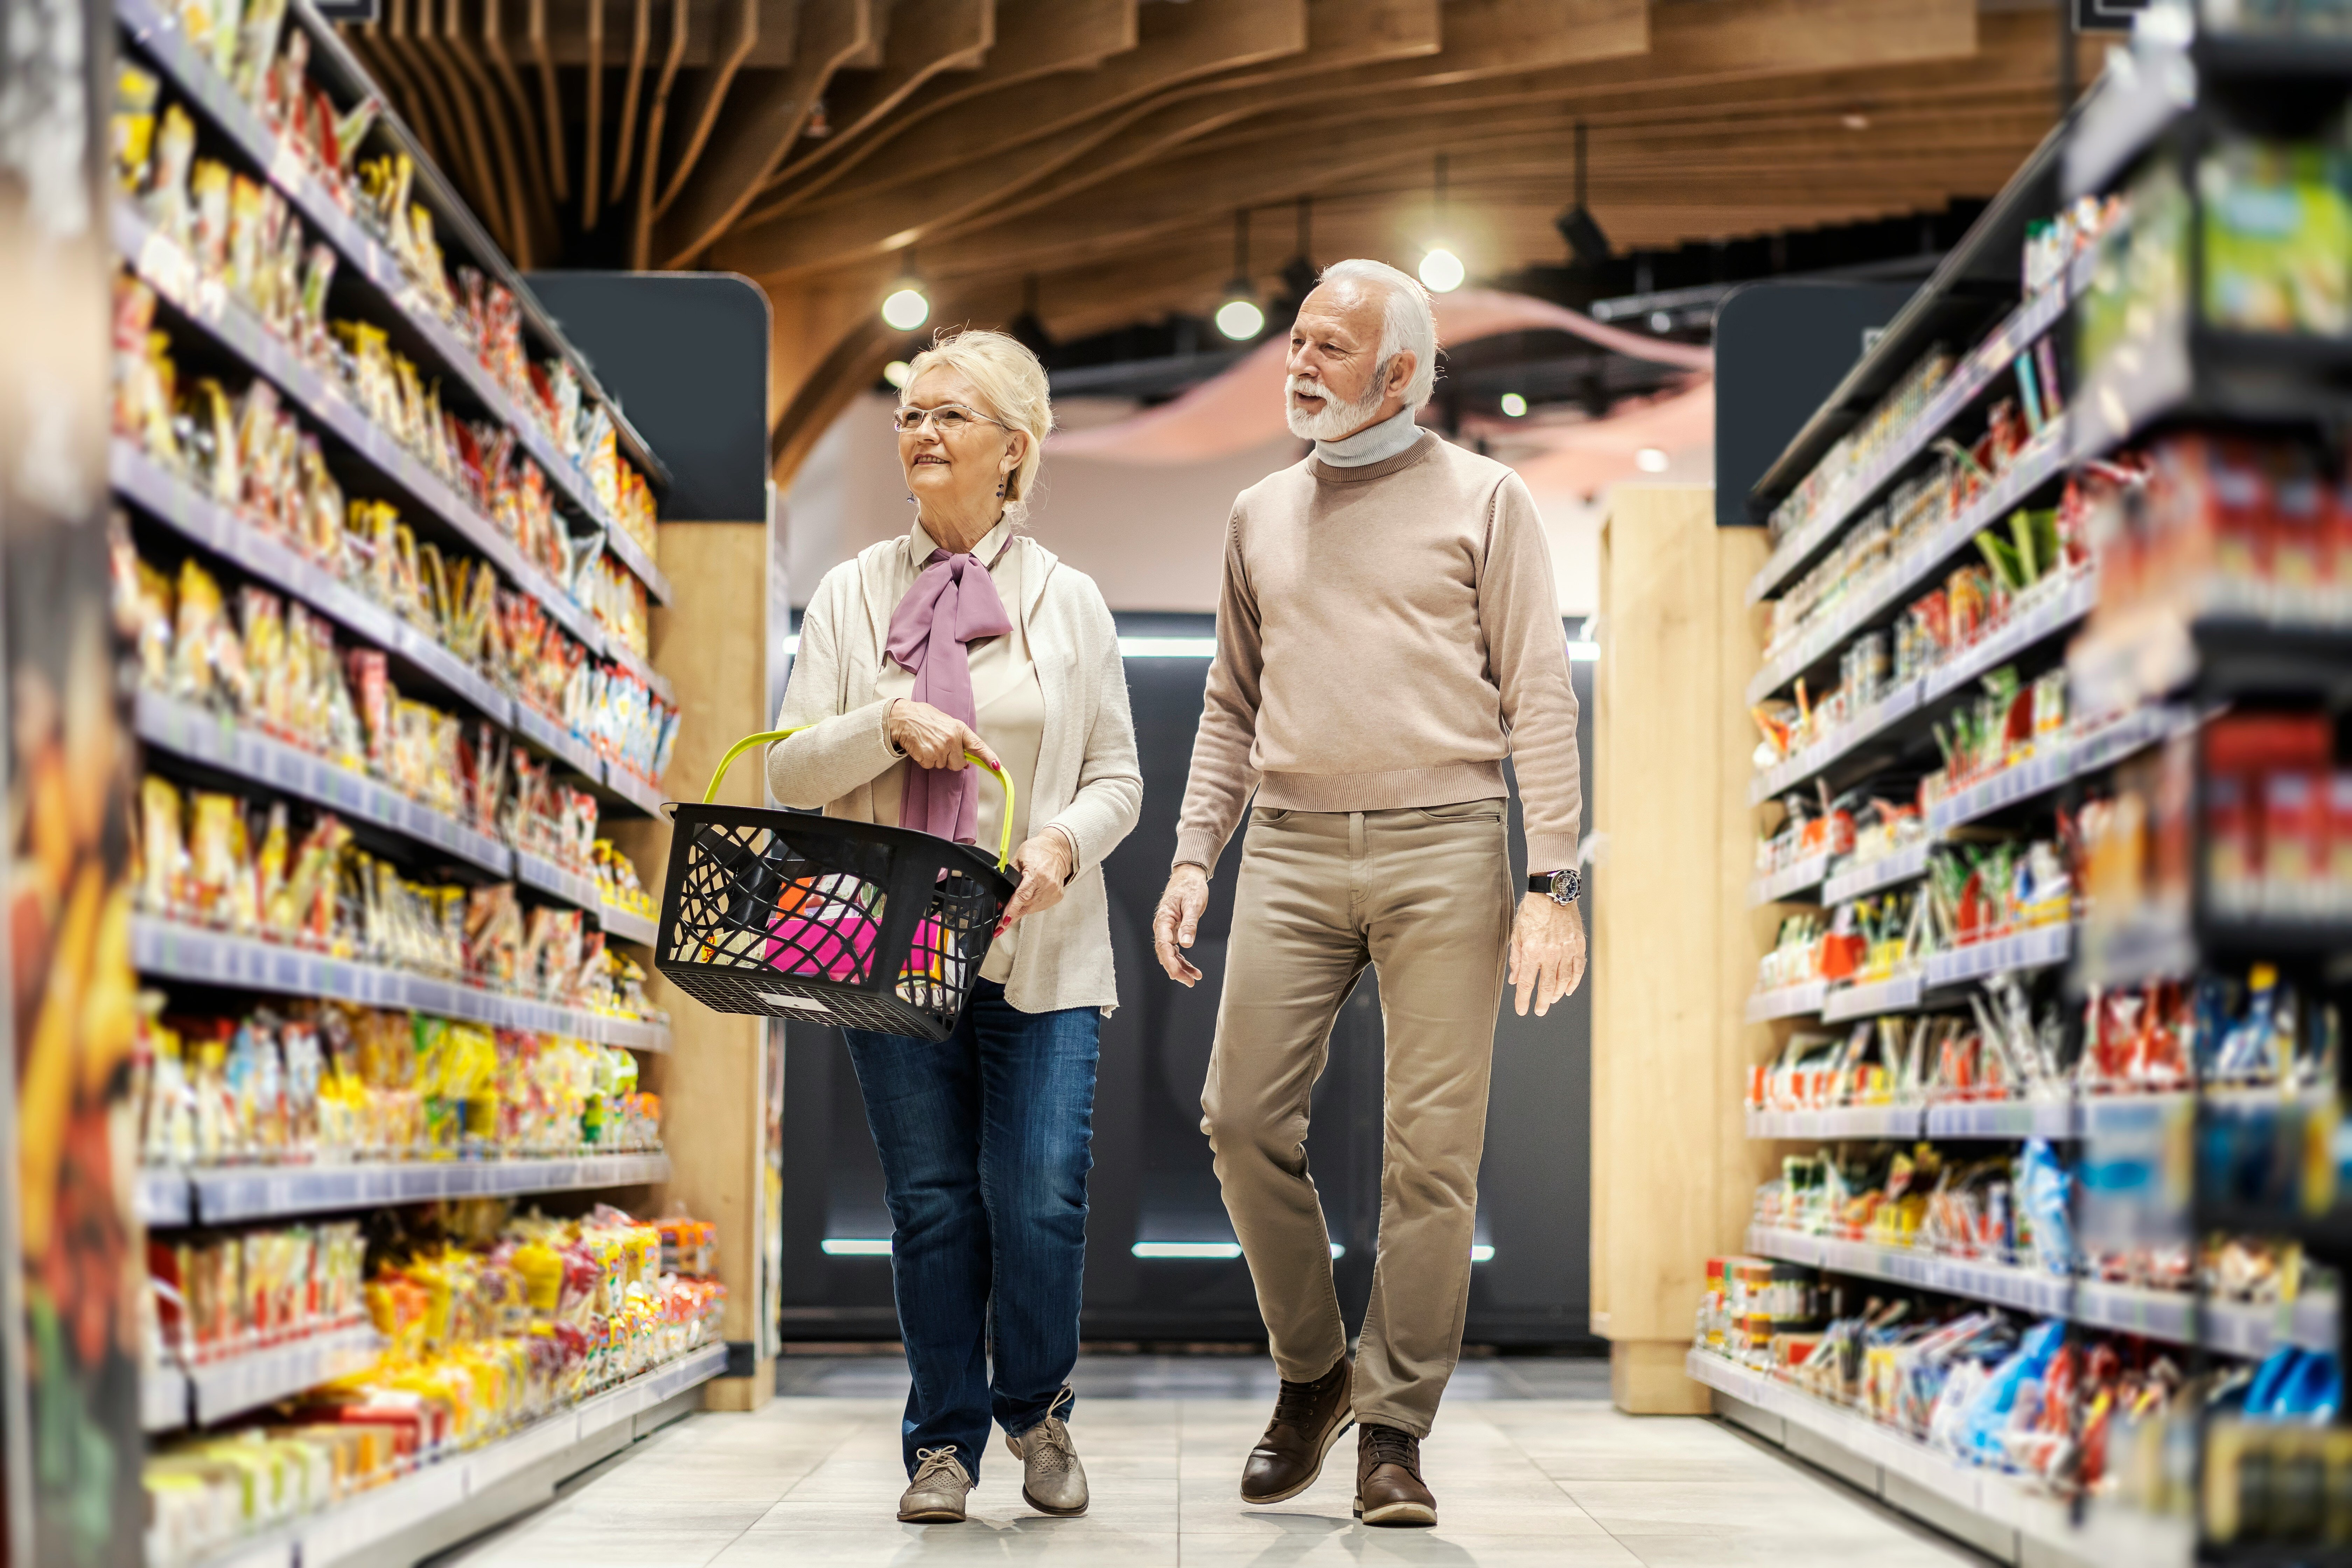 elderly couple walking through grocery store aisles 